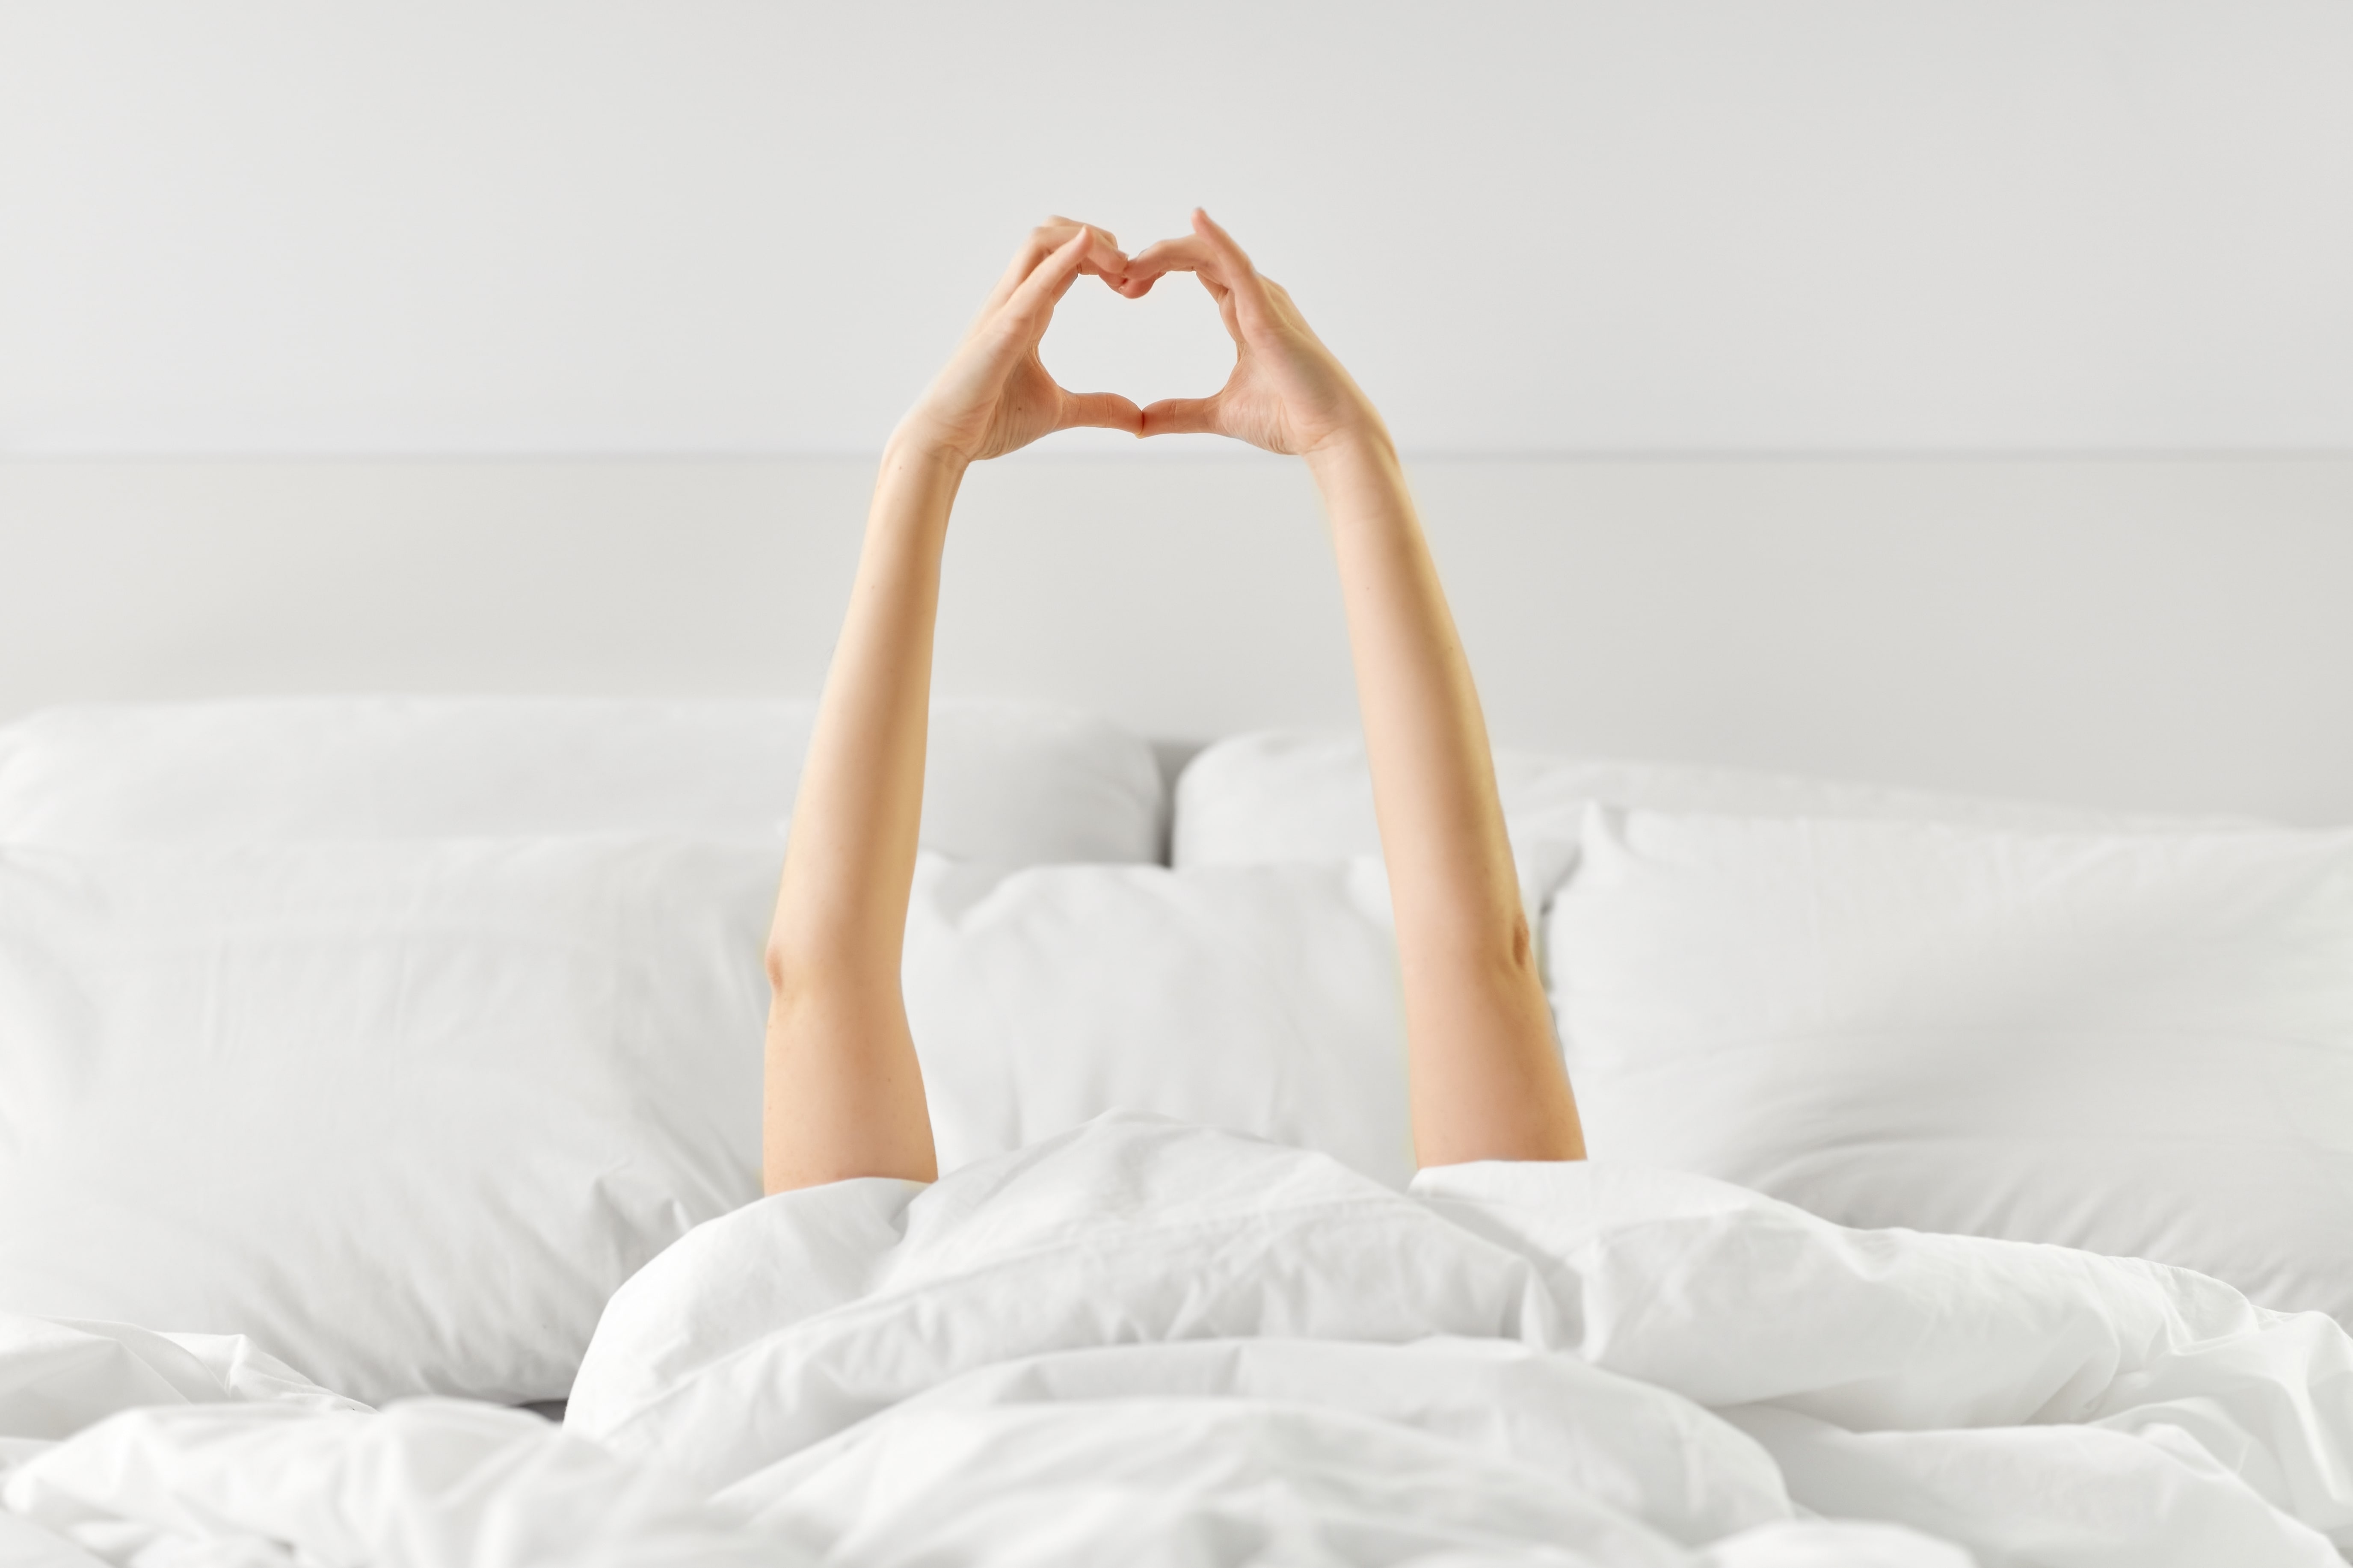 The arms of a woman in bed are outstretched with the fingers coming together to form a heart.